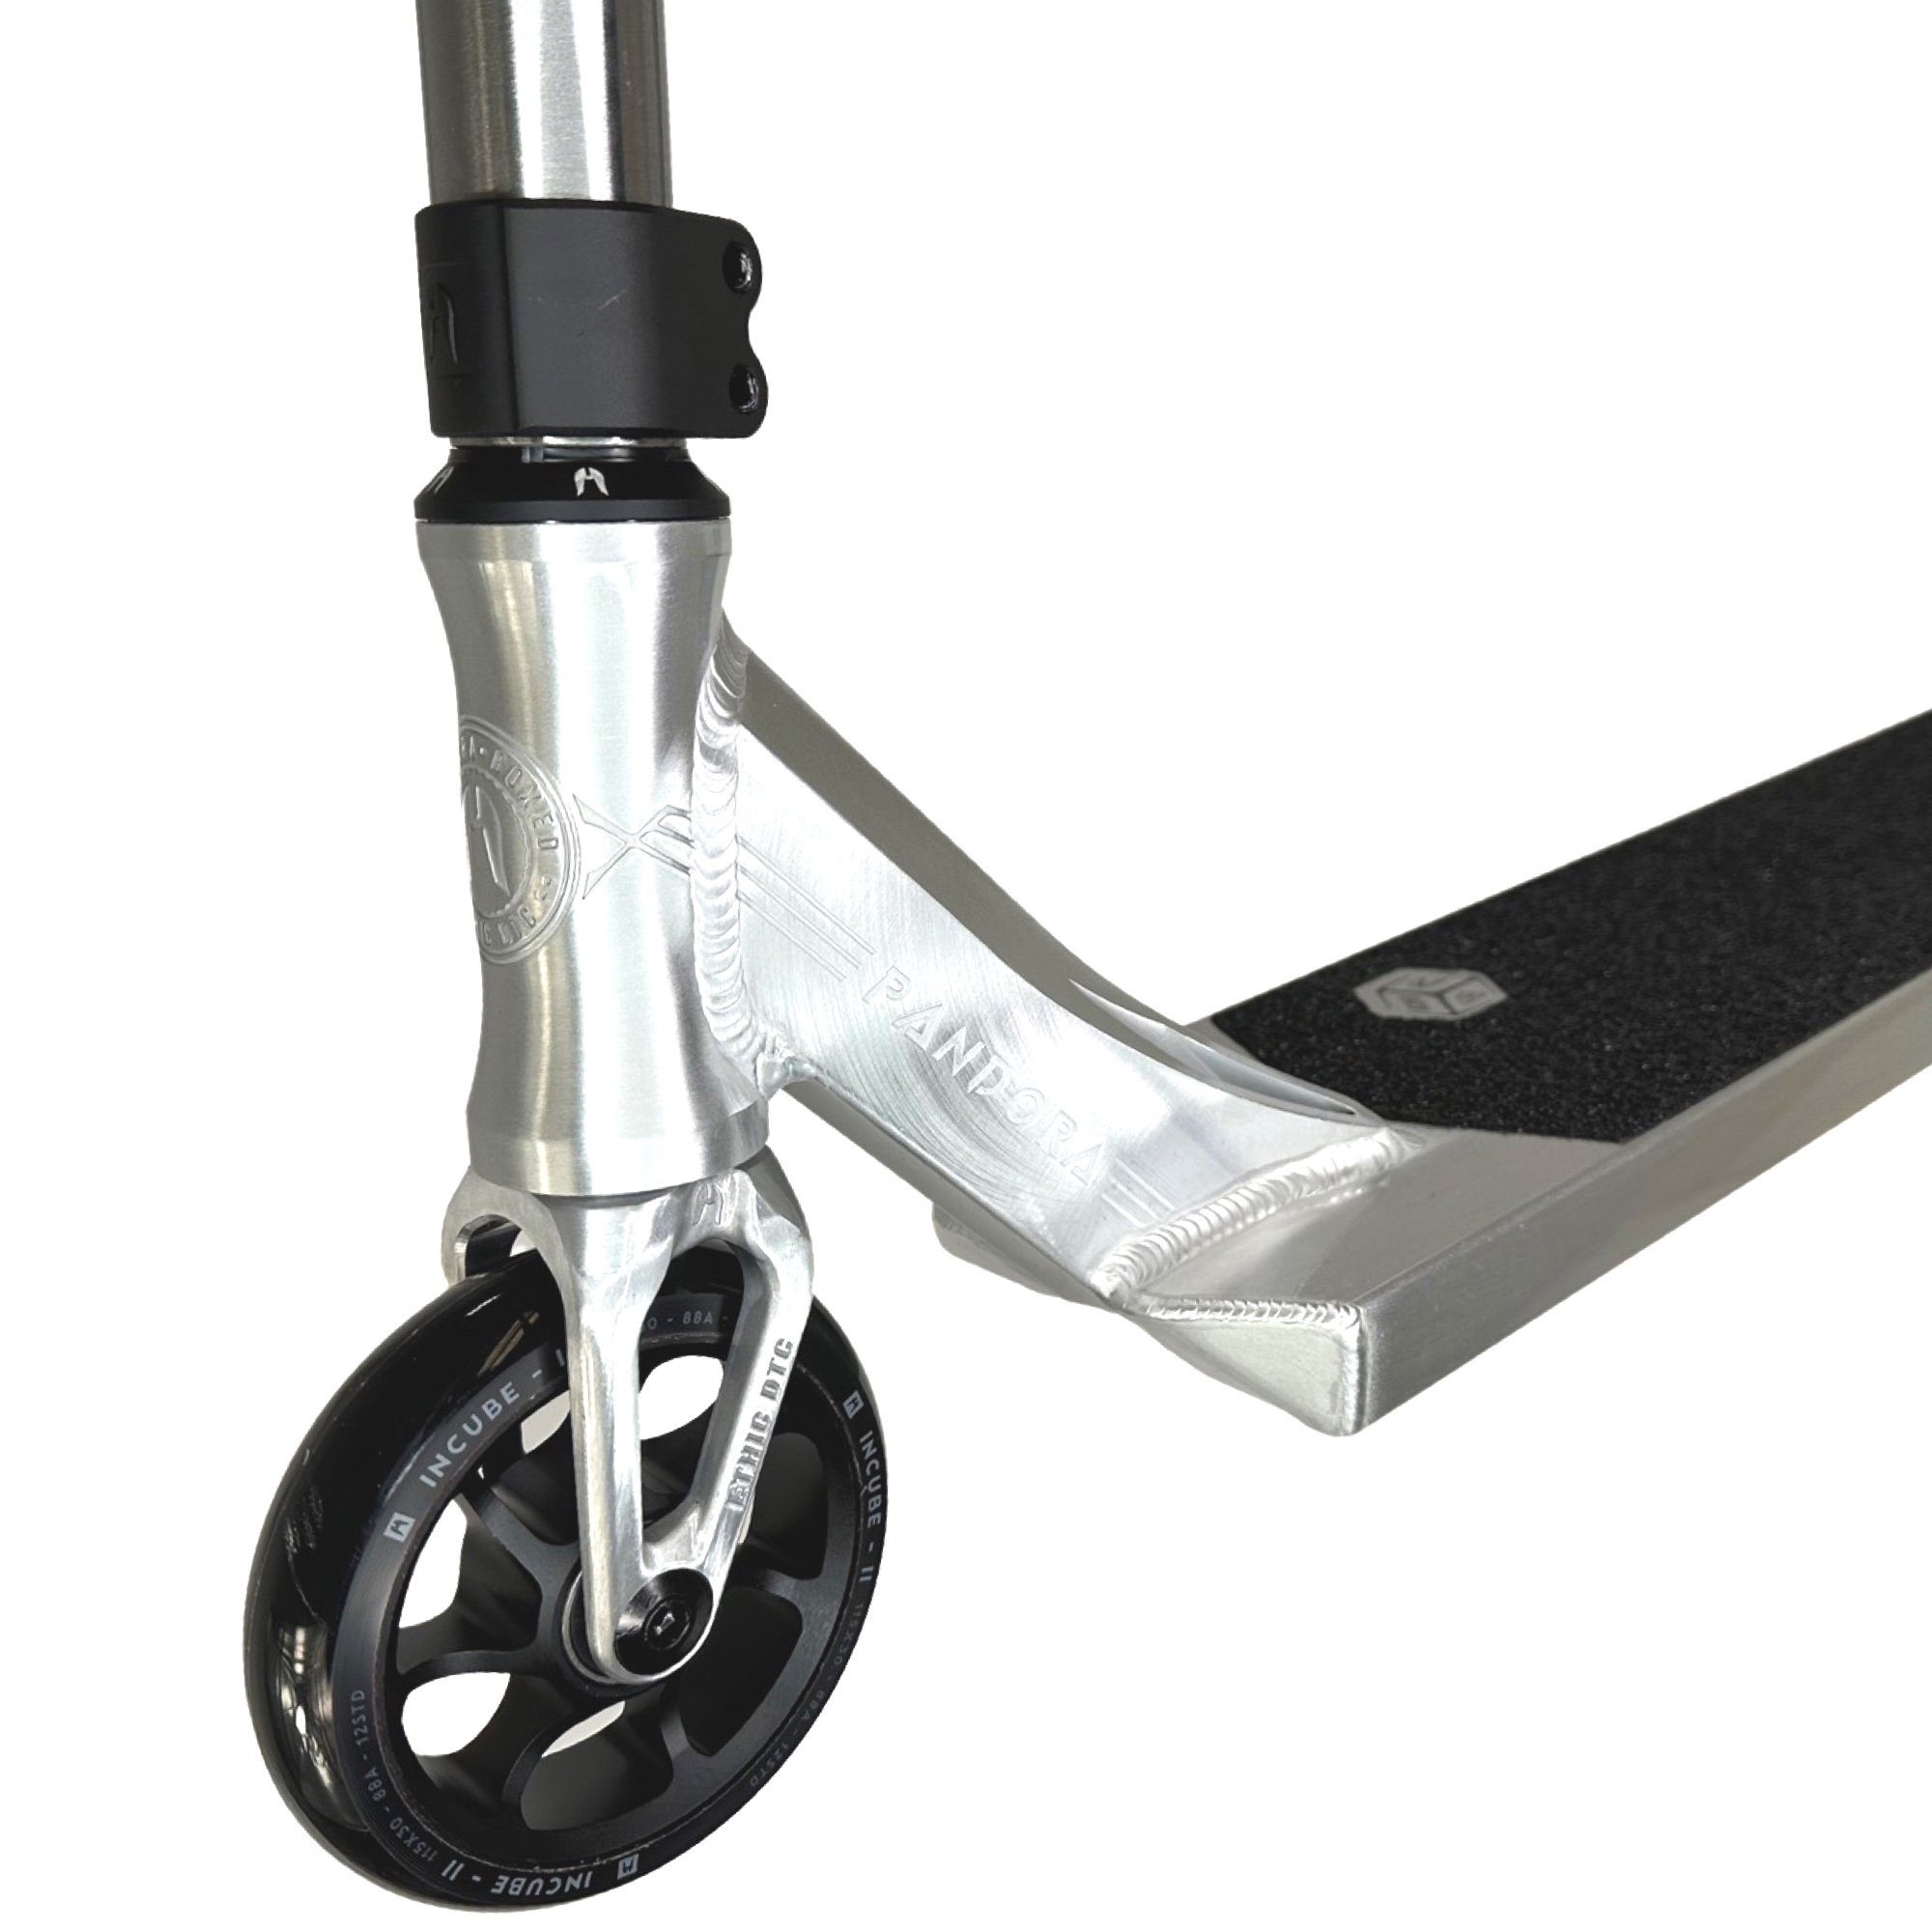 H=90cm DTC 3,4kg Stuntscooter Ethic Silber Stunt-Scooter DTC Ethic L Pandora